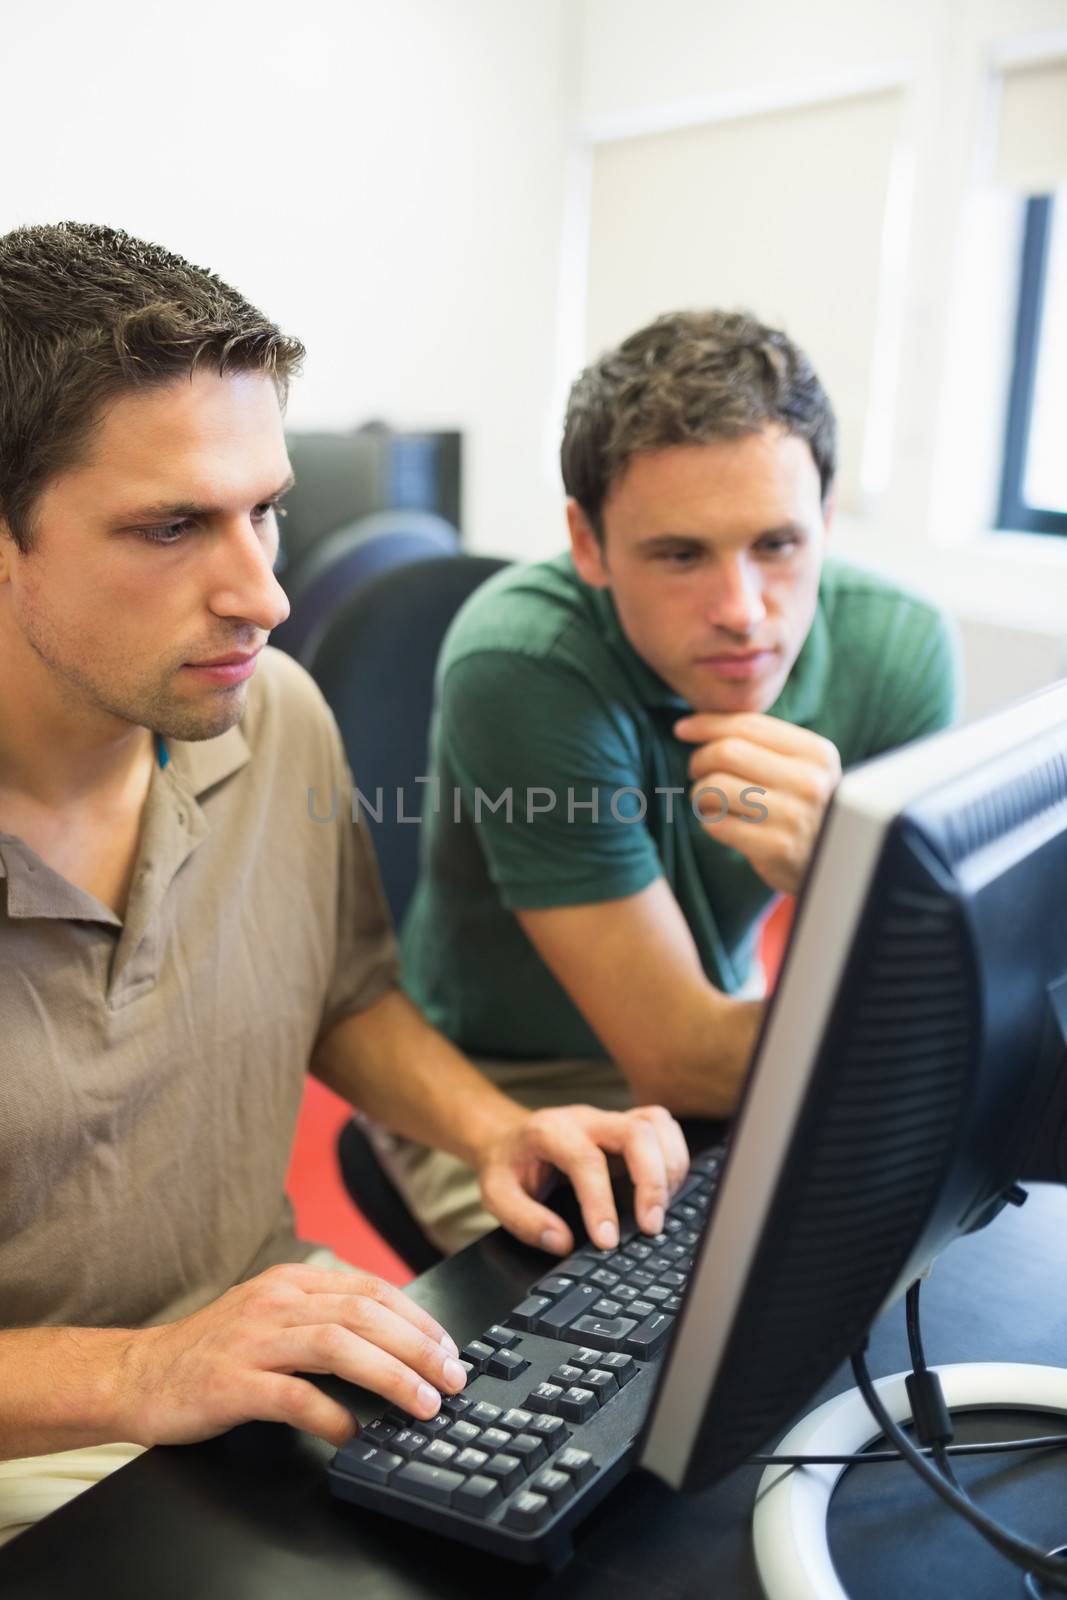 Concentrated teacher and mature student looking at computer screen in the computer room